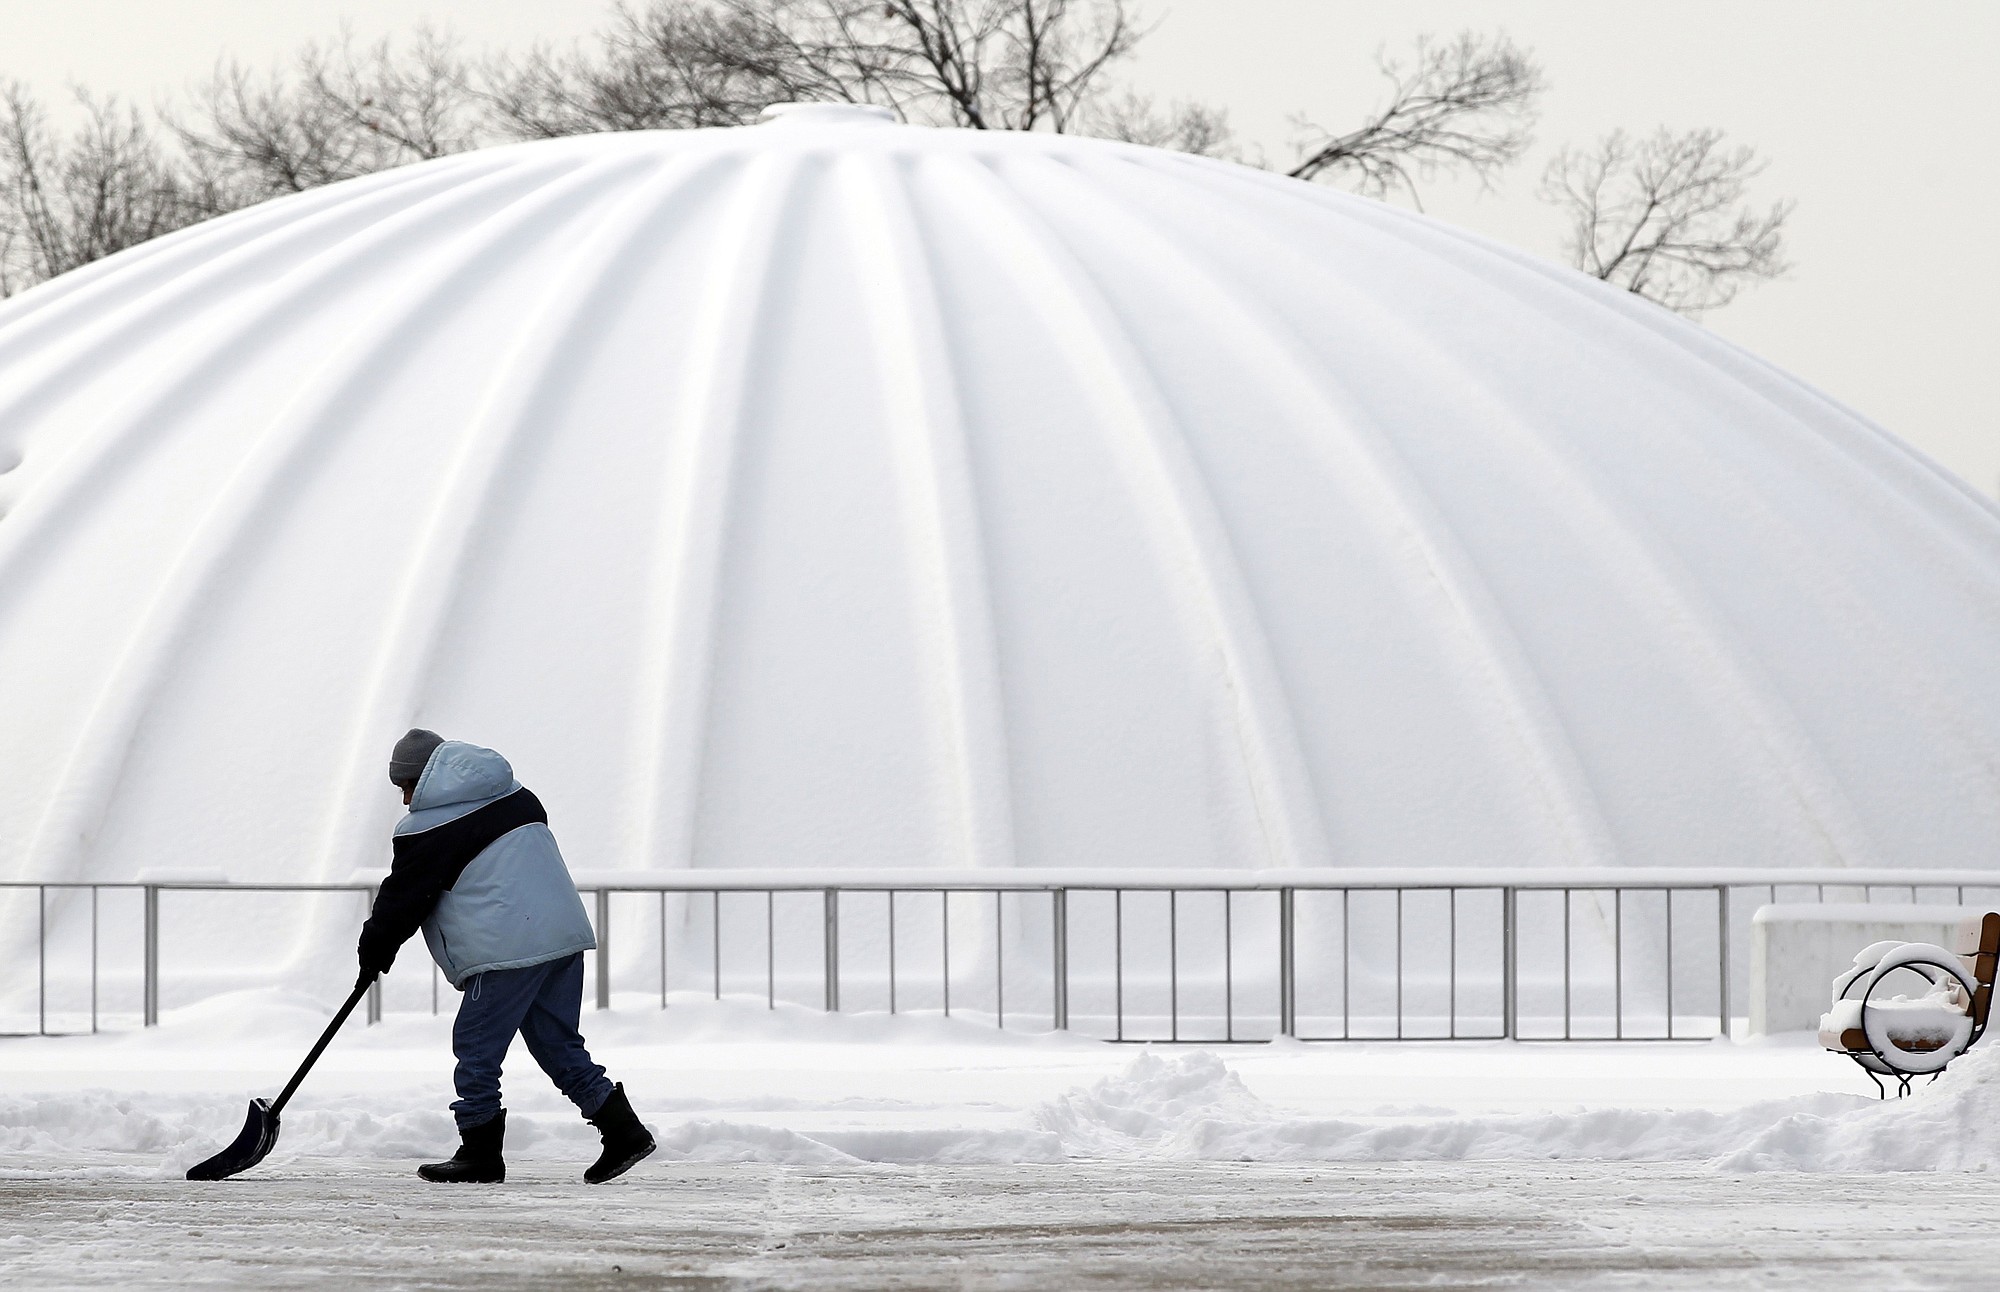 After an overnight storm dropped fresh snow, a worker shovels near the planetarium at the New Jersey State Museum on Tuesday in Trenton, N.J.